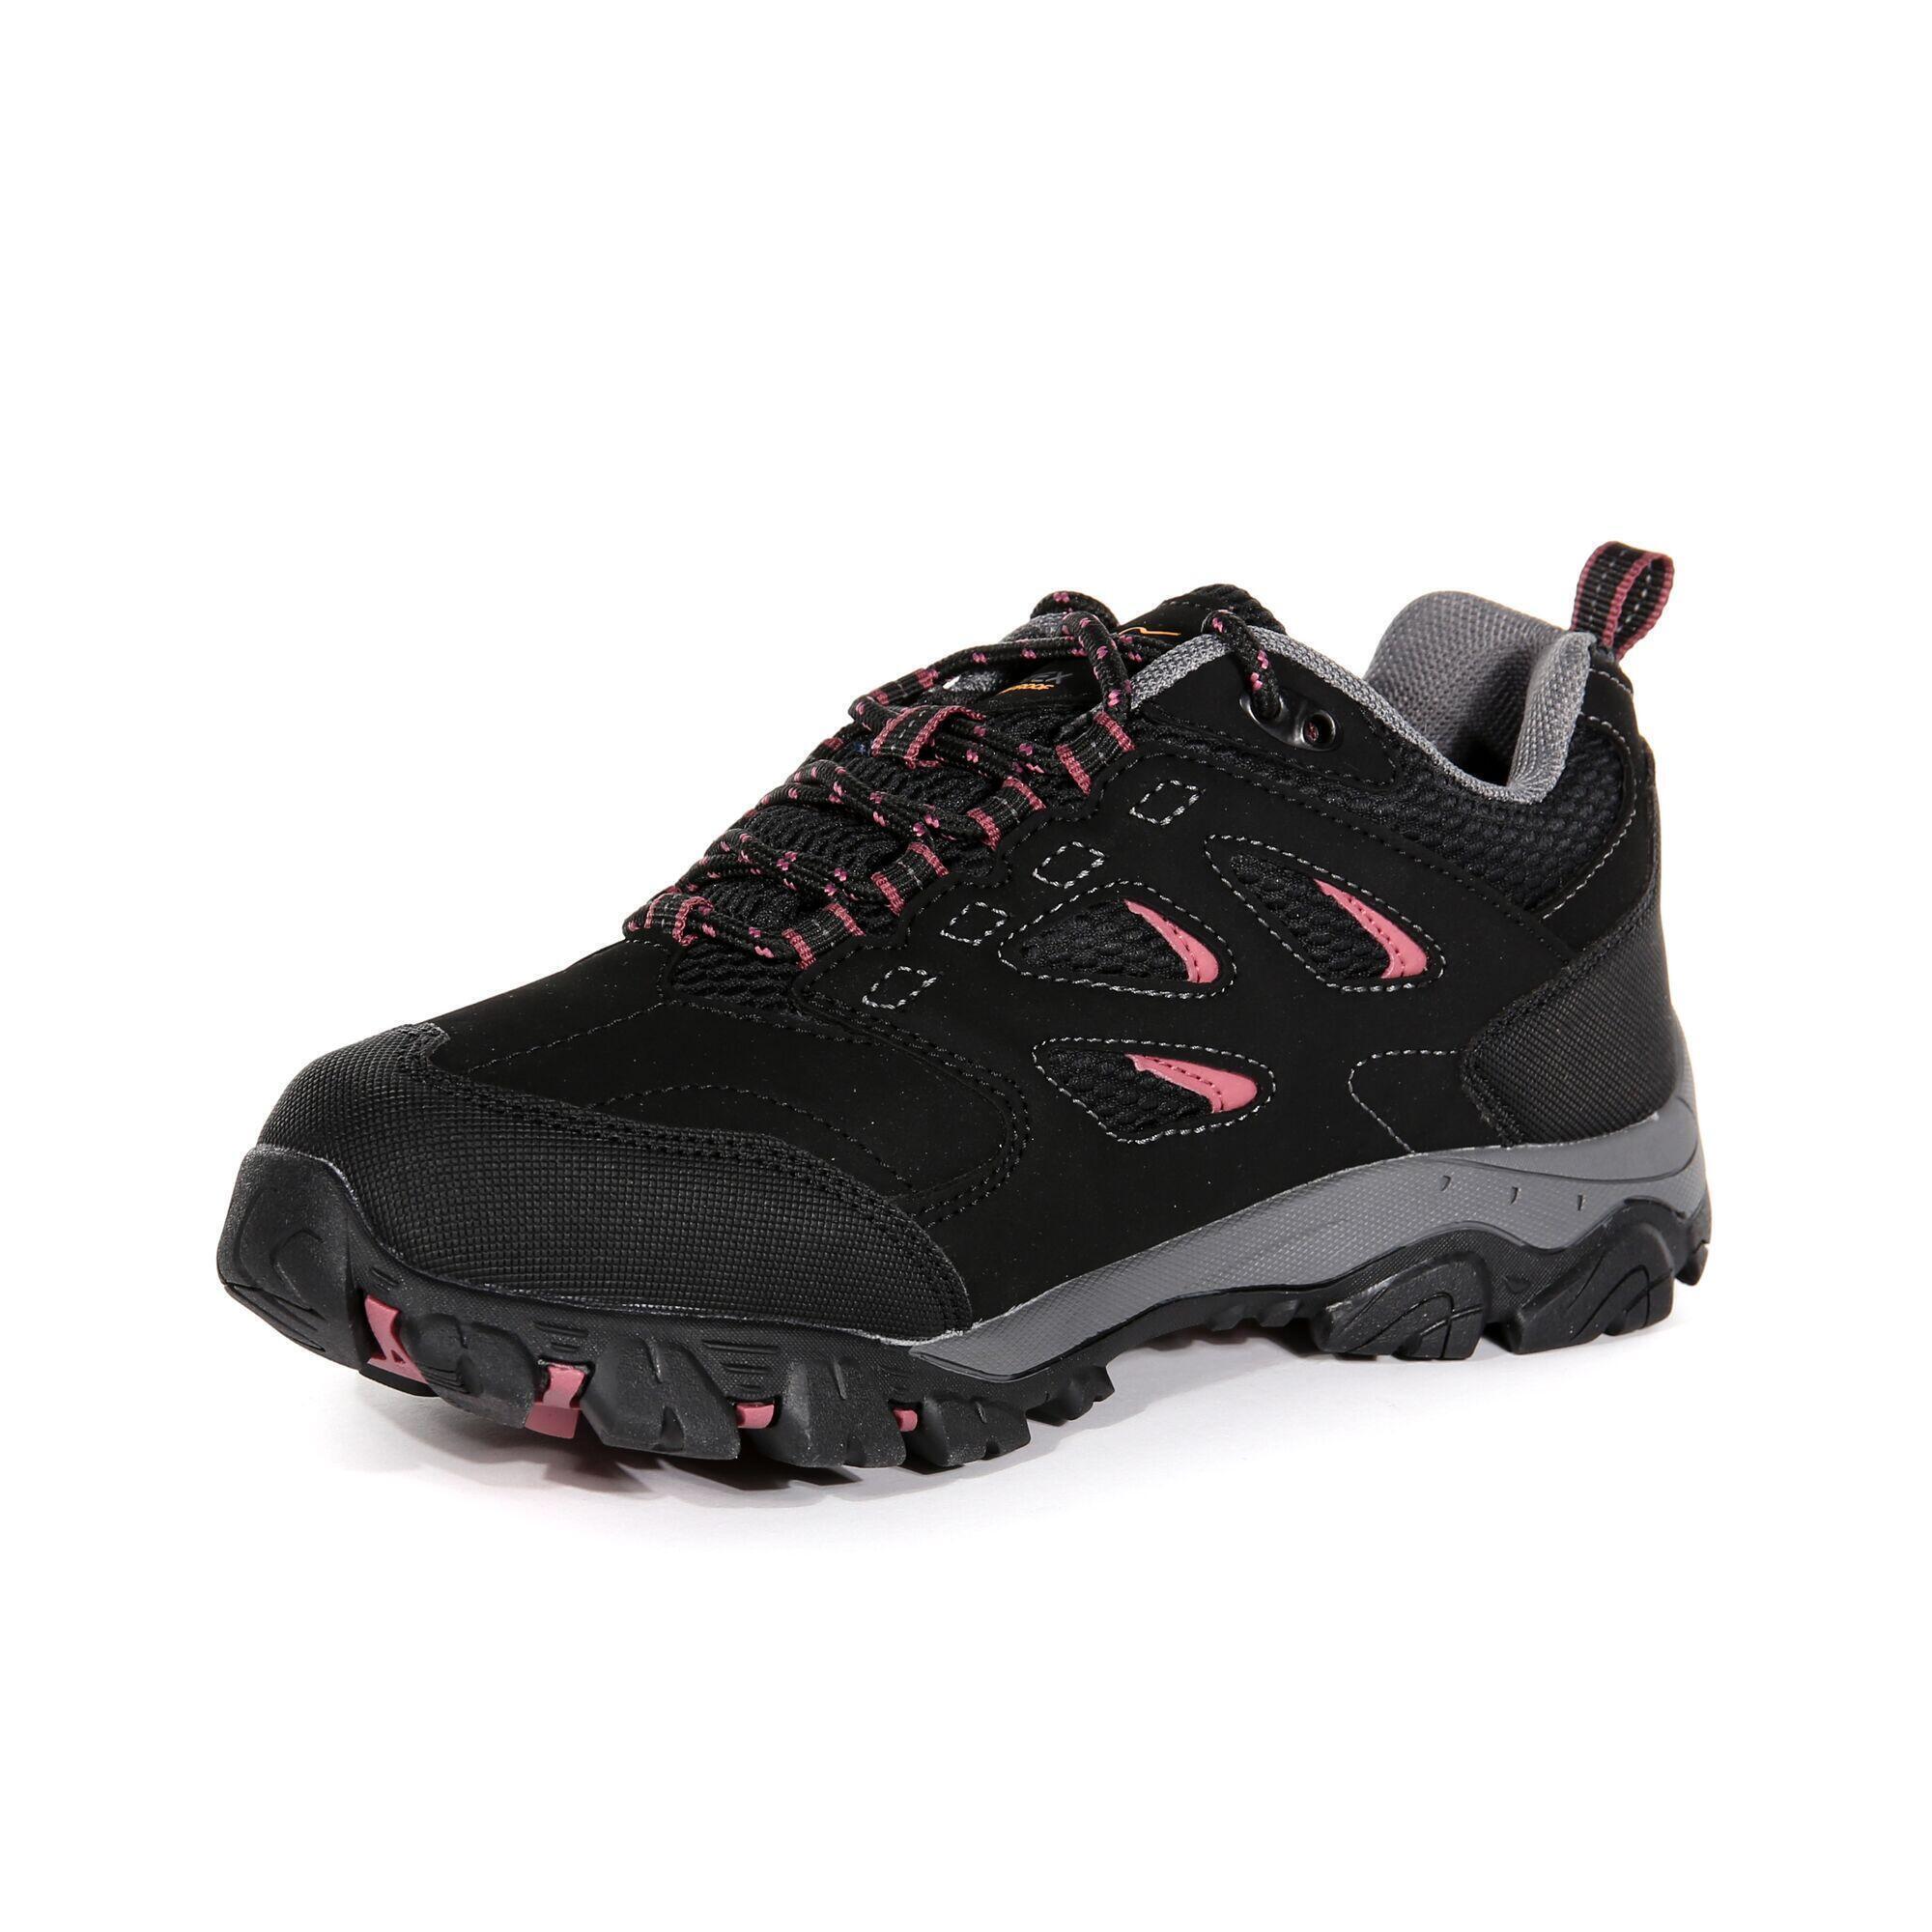 Lady Holcombe IEP Low Women's Hiking Boots - Black / Rose 4/5